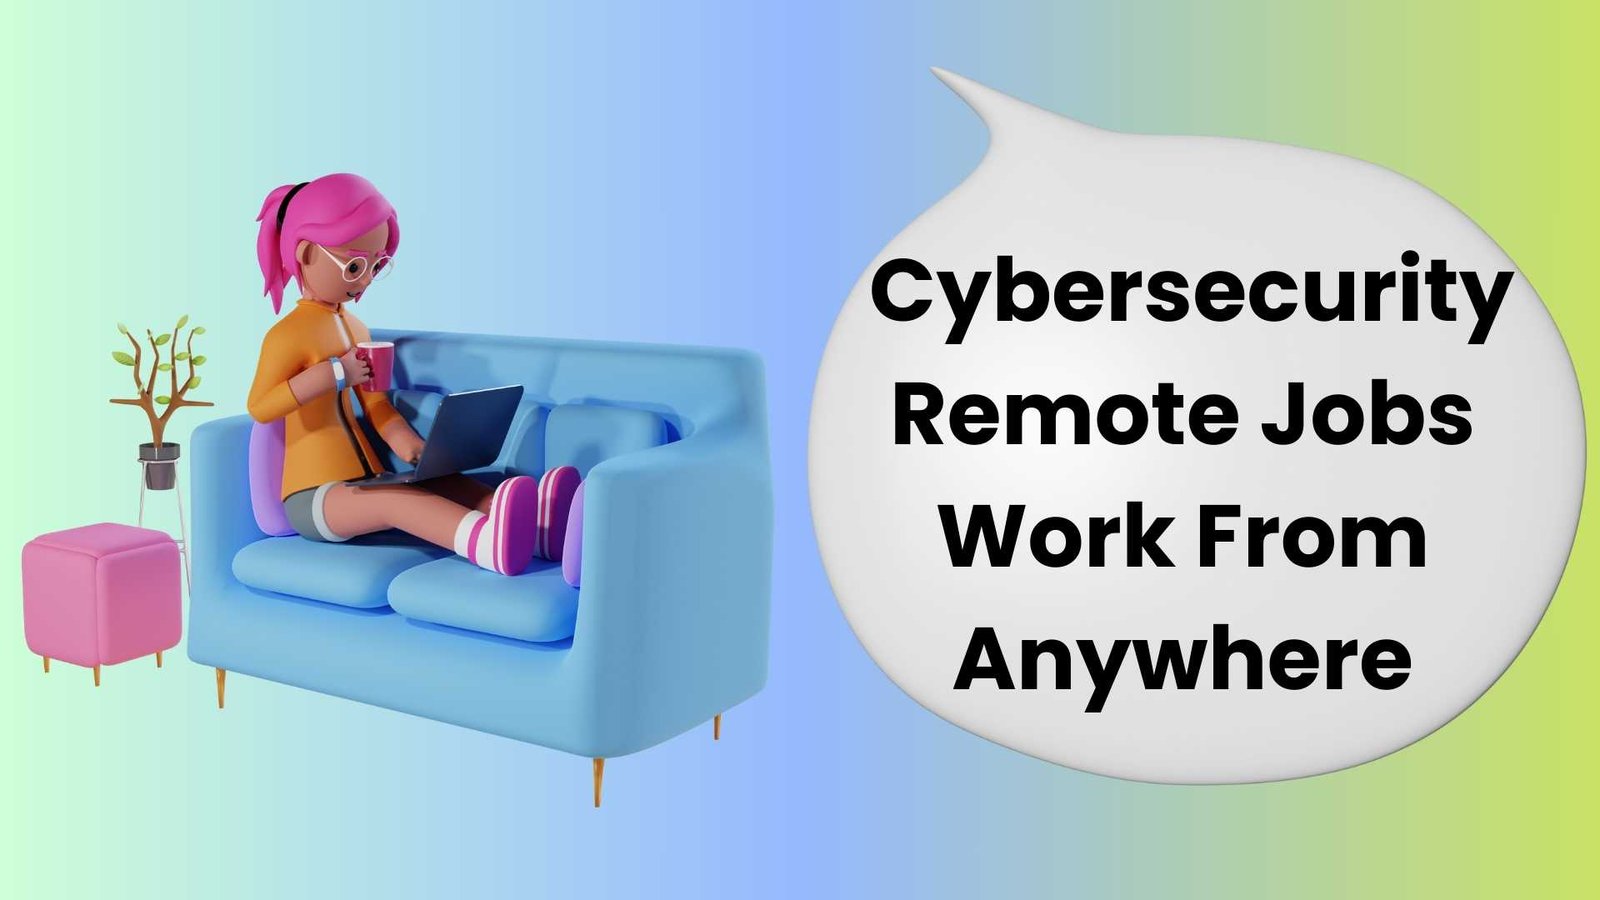 Cybersecurity Remote Jobs